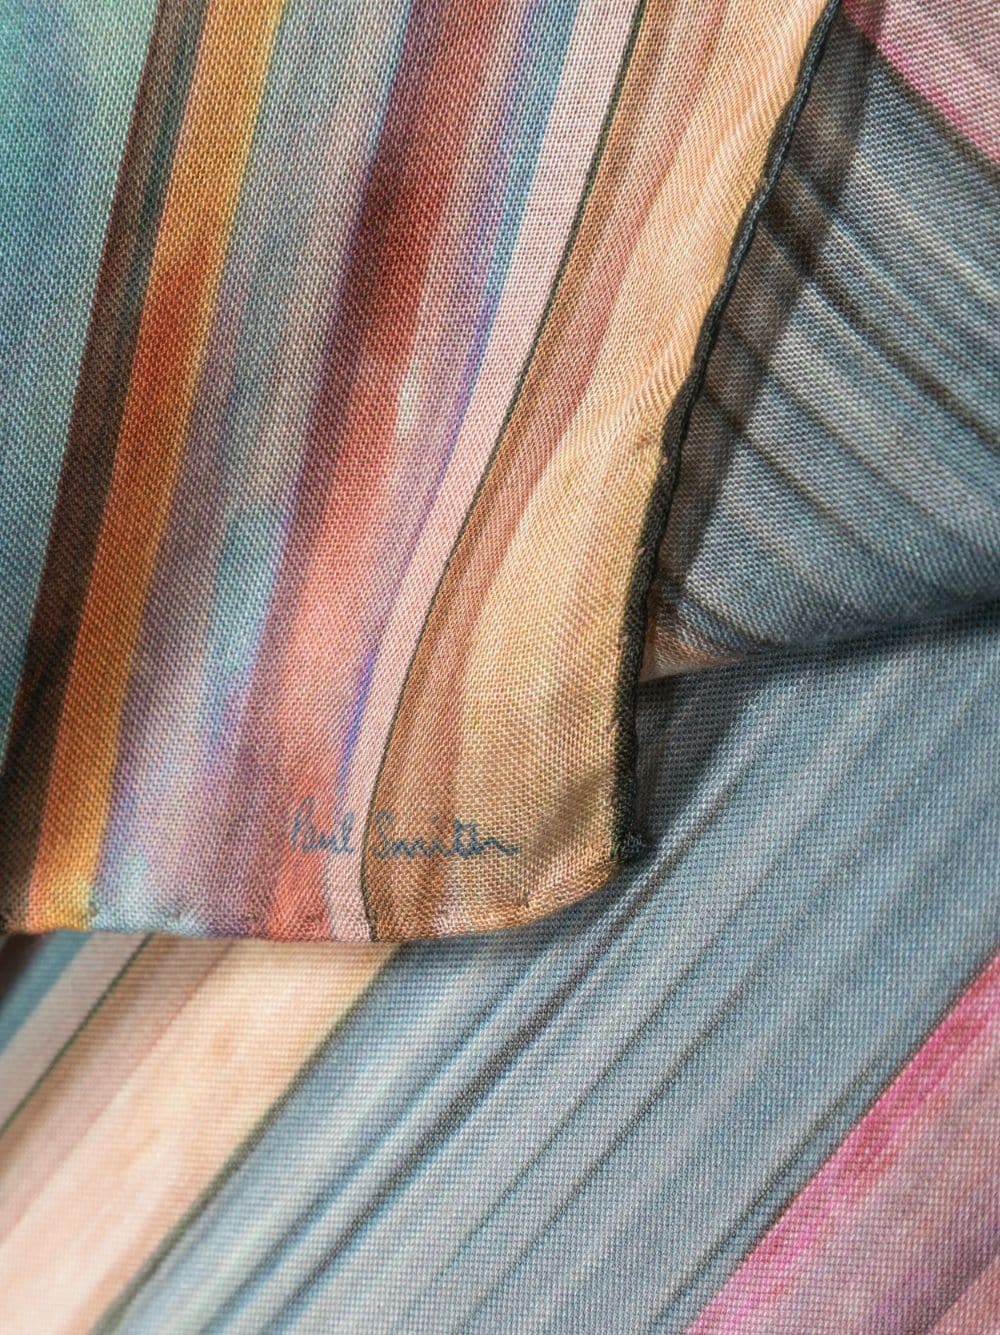 Paul Smith Vertical-striped Scarf